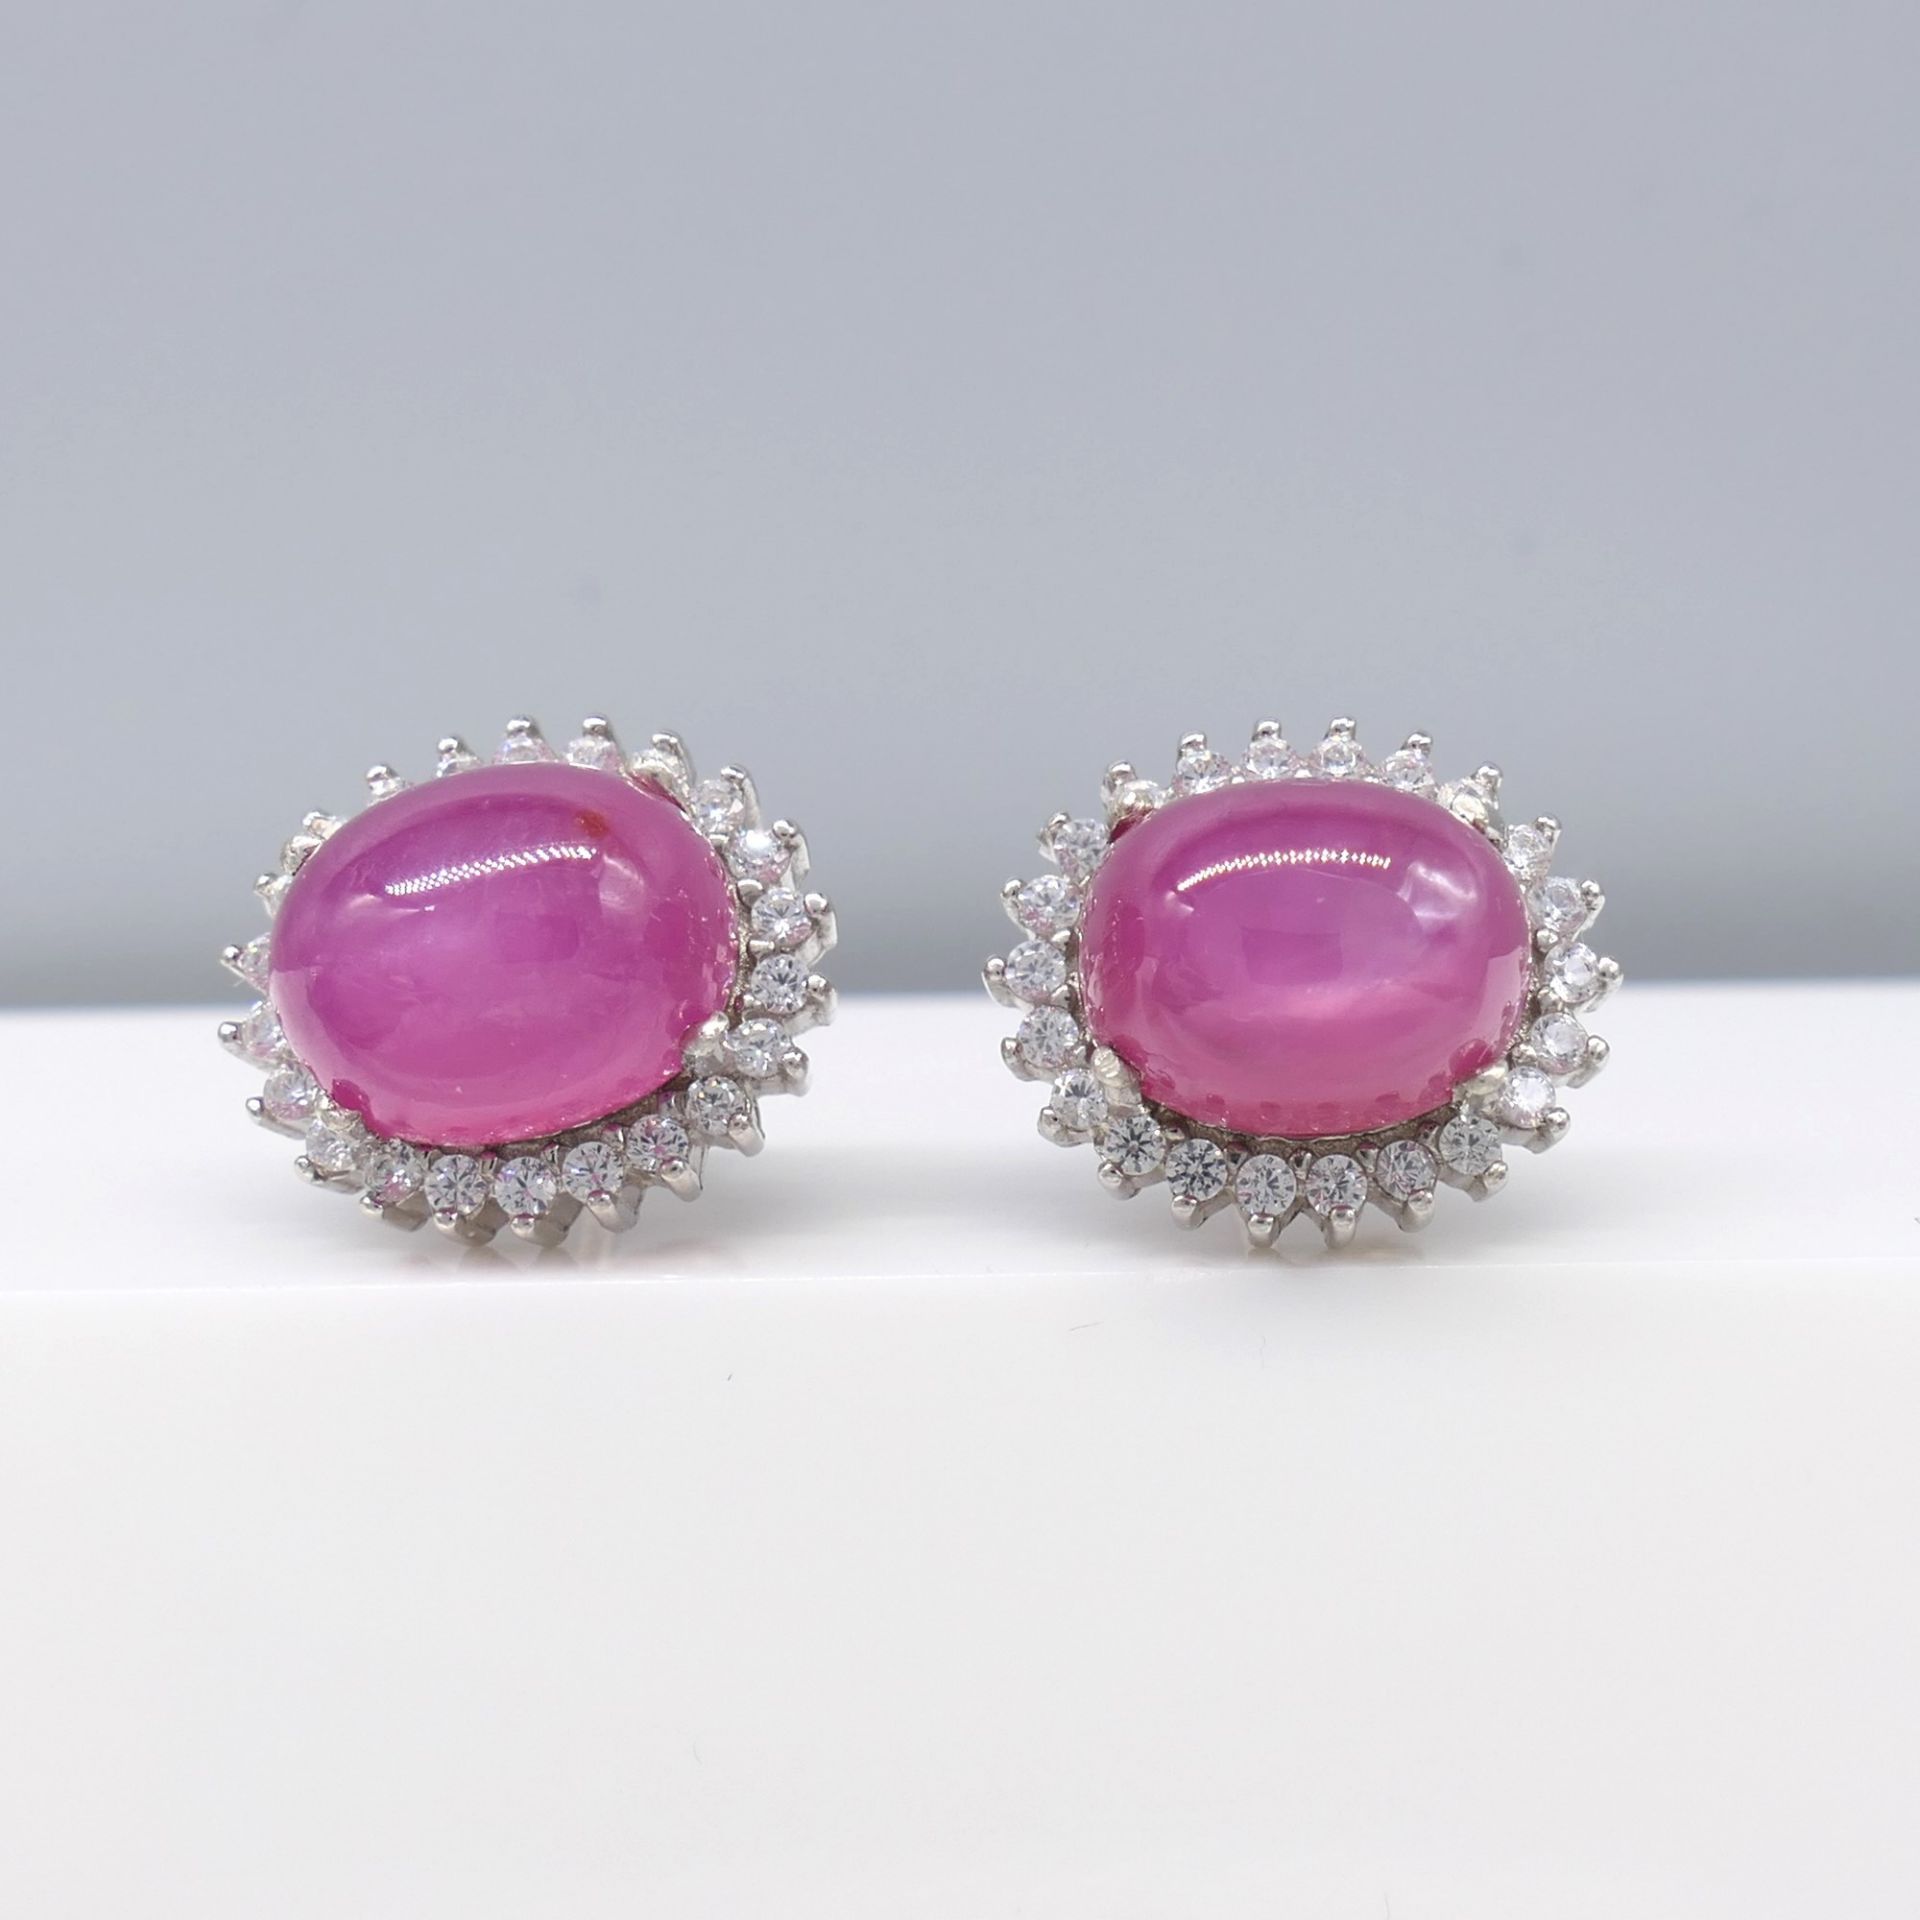 Cabochon Ruby Ear Studs In Sterling Silver, Boxed - Image 4 of 7